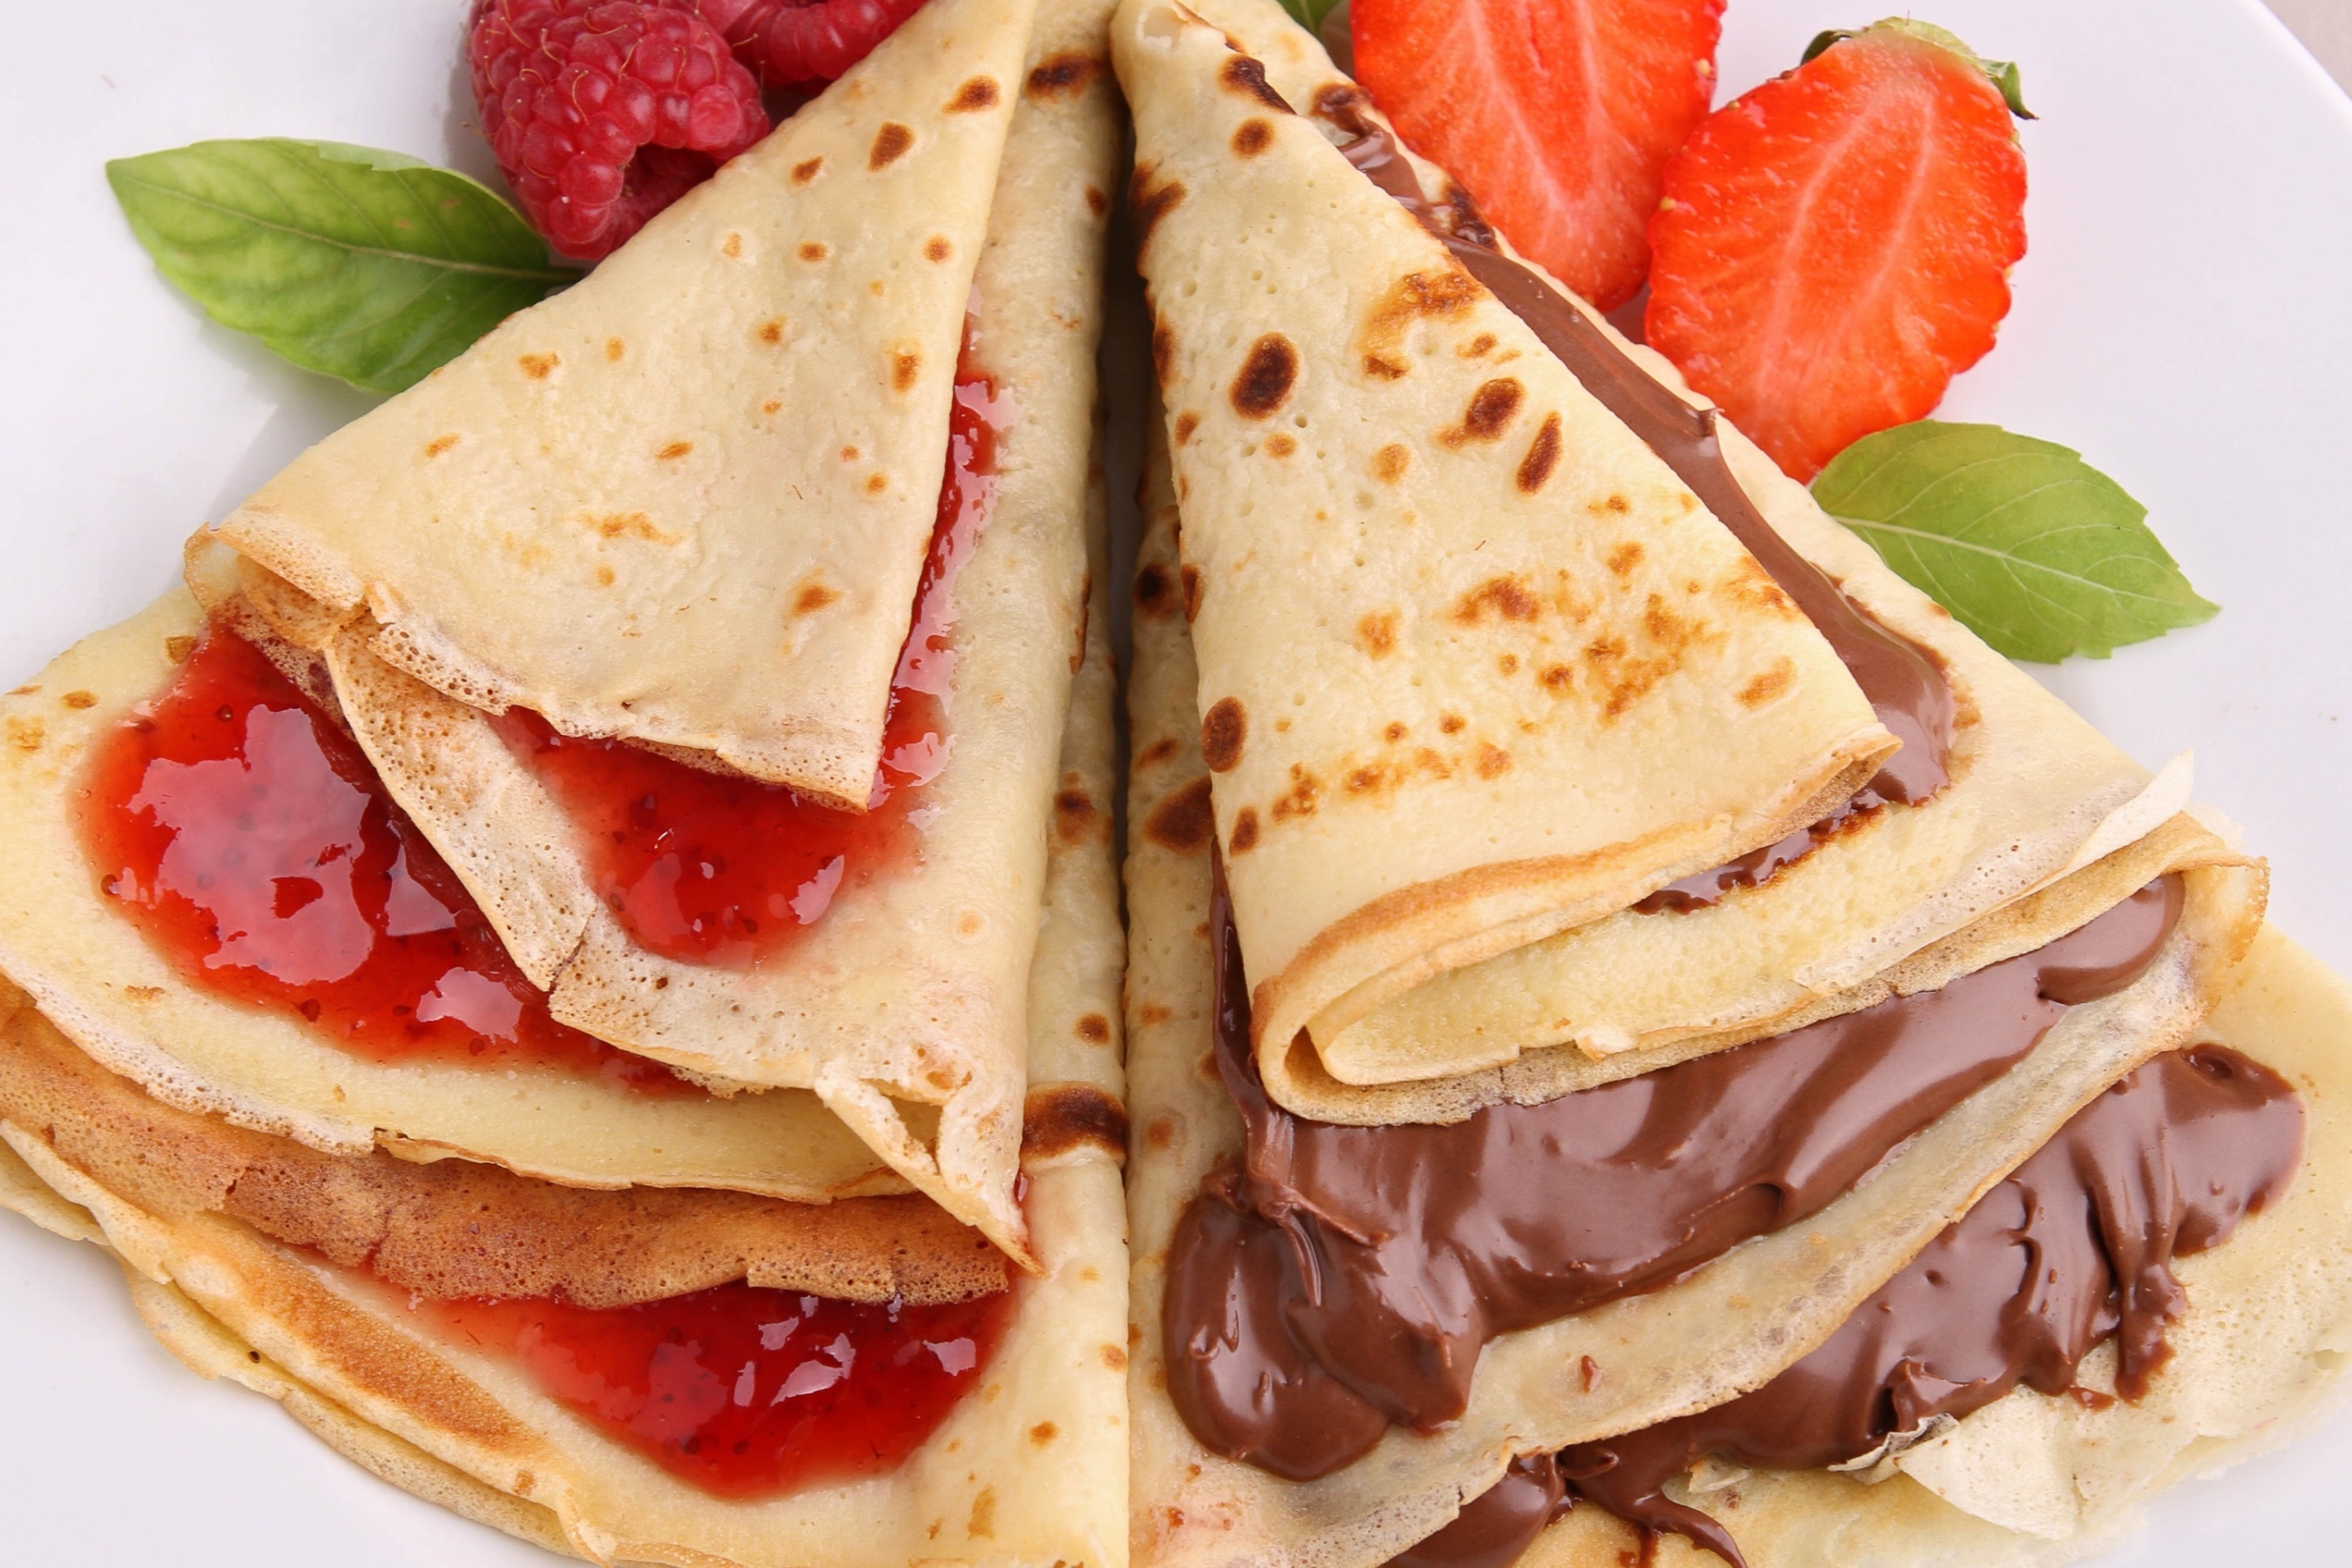 Most delicious pancakes with jam screenshot #1 2880x1920